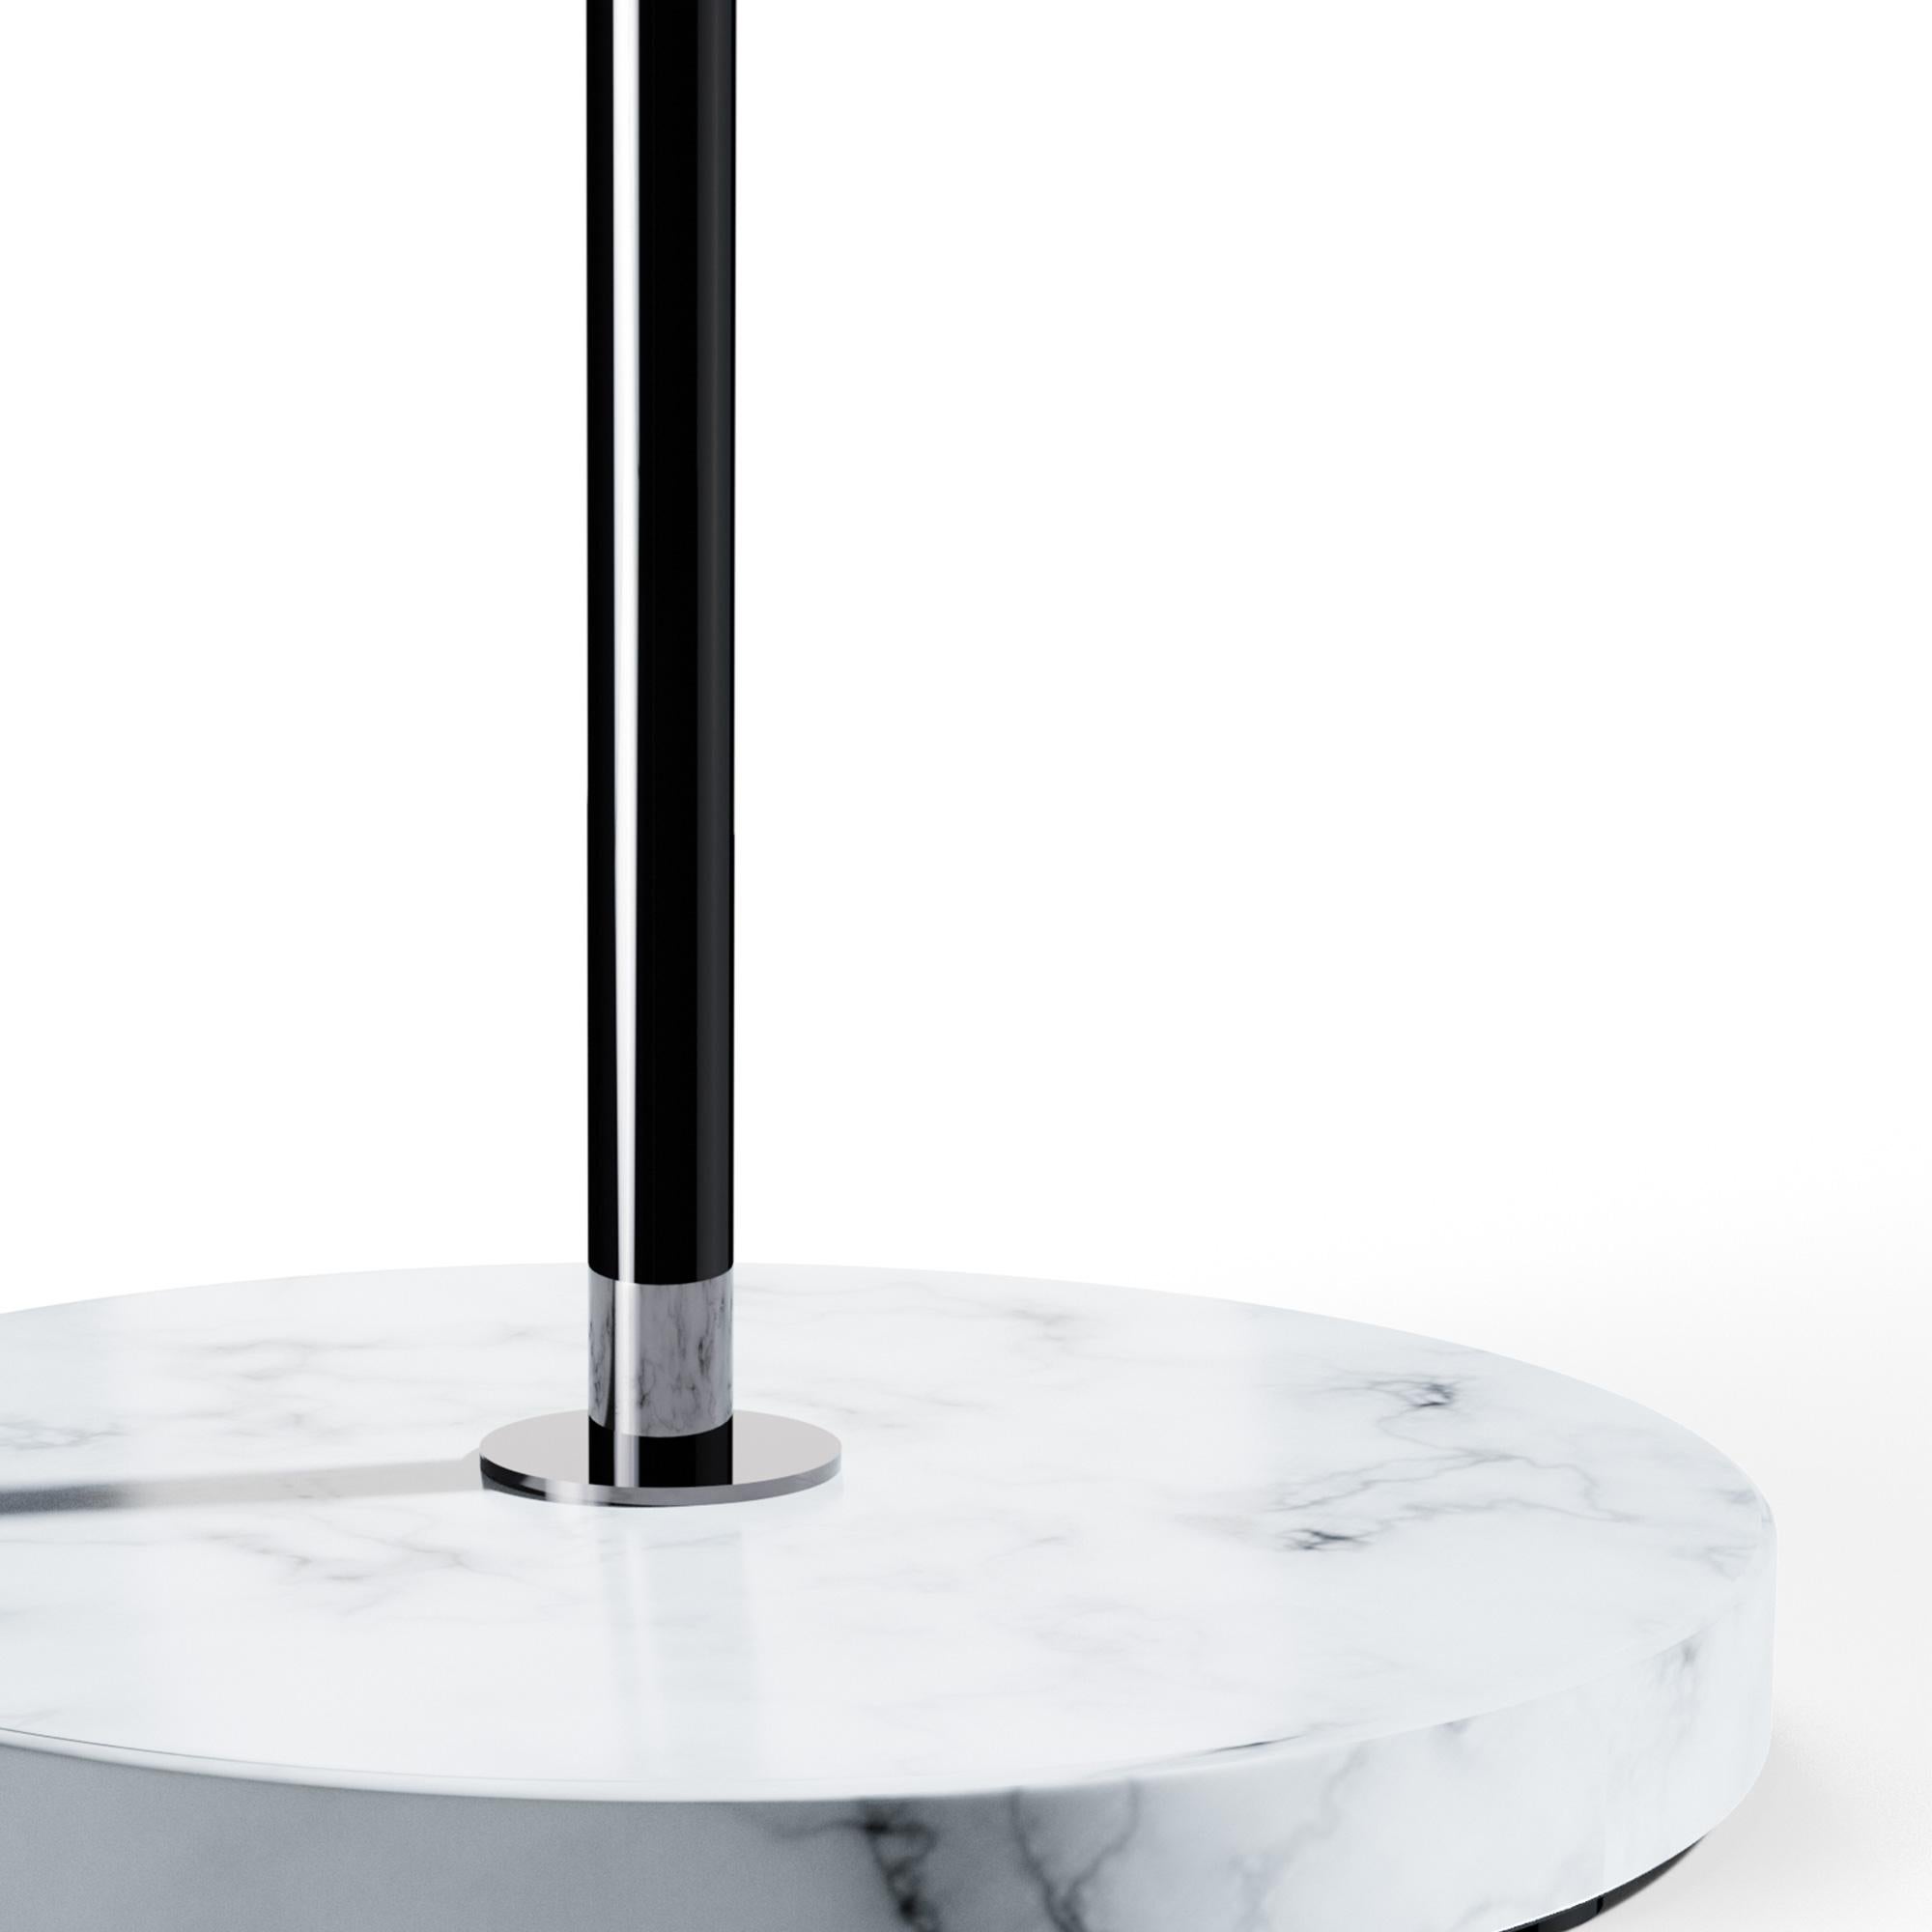 Large Joseph-André Motte J14 Floor Lamp in Chrome and Black Marble for Disderot In New Condition For Sale In Glendale, CA